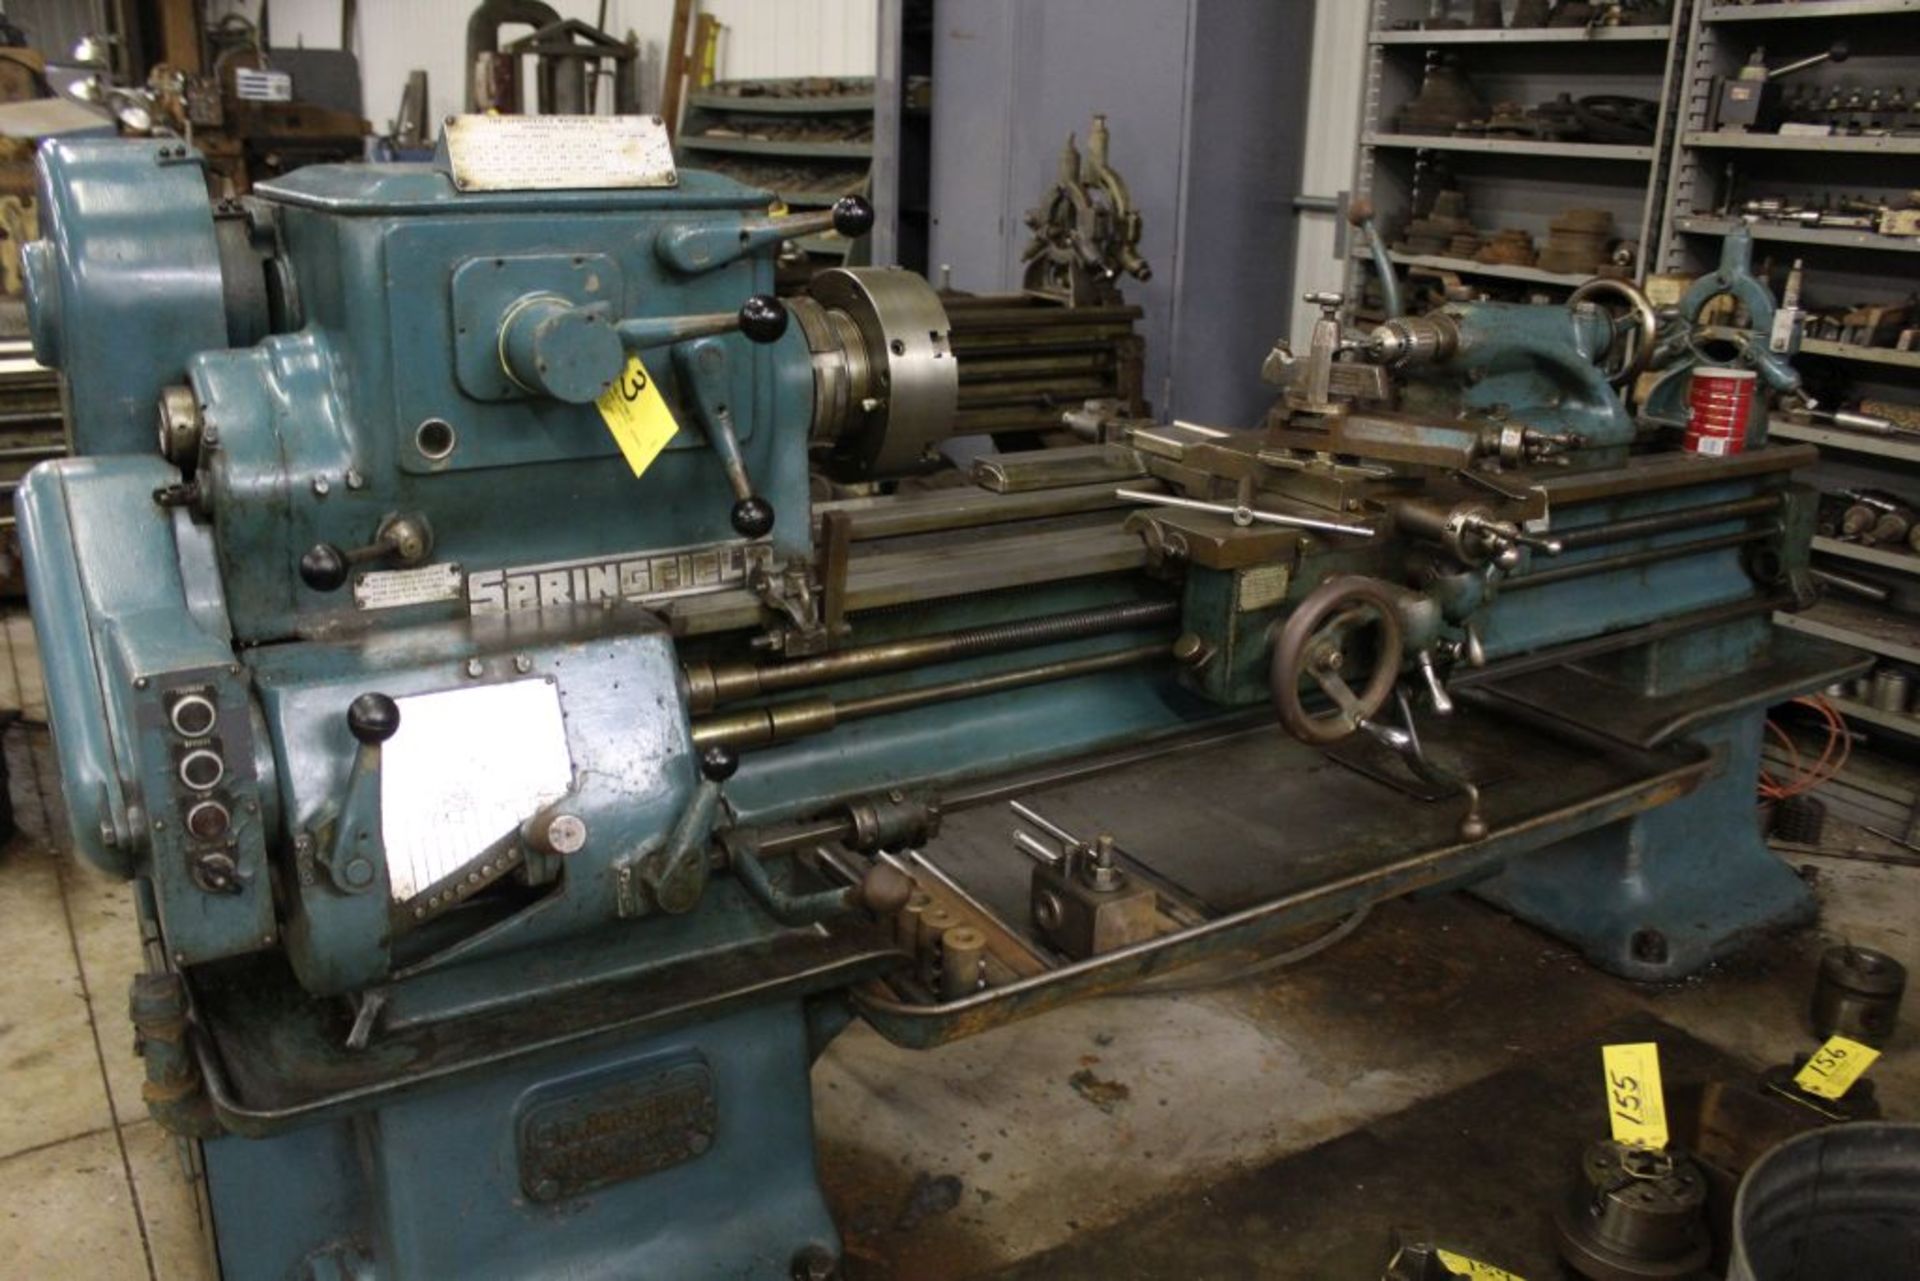 Springfield lathe, sn 52071, 14", 1 3/4" hole, 16" swing, 48" center to center, taper attachment, - Image 14 of 14